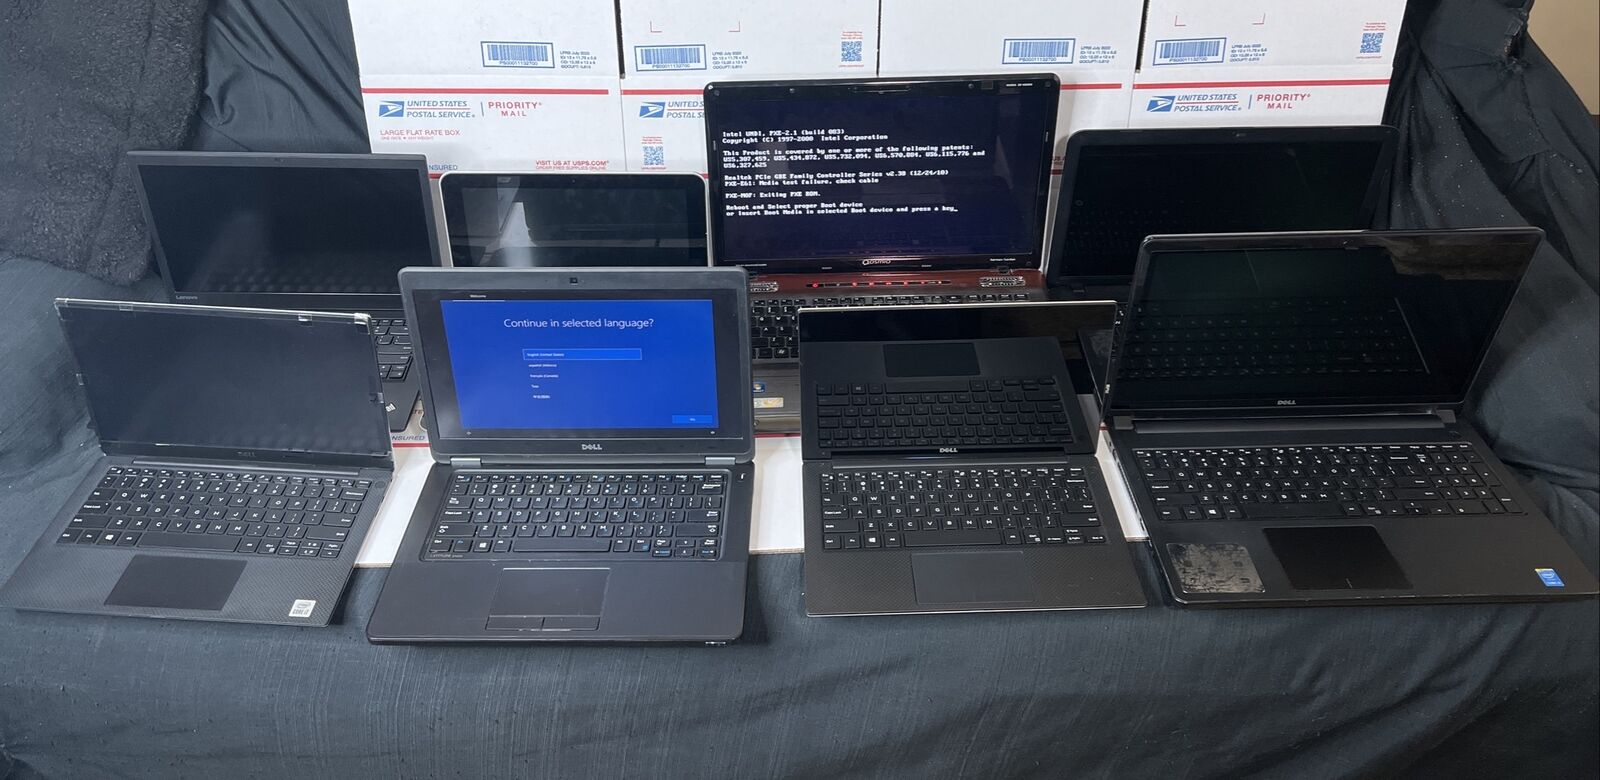 Lot of 8 ASSORTED Laptops- Acer ,HP,TOSHIBA - i7, i5,i3, Intel,  -AS IS/UNTESTED